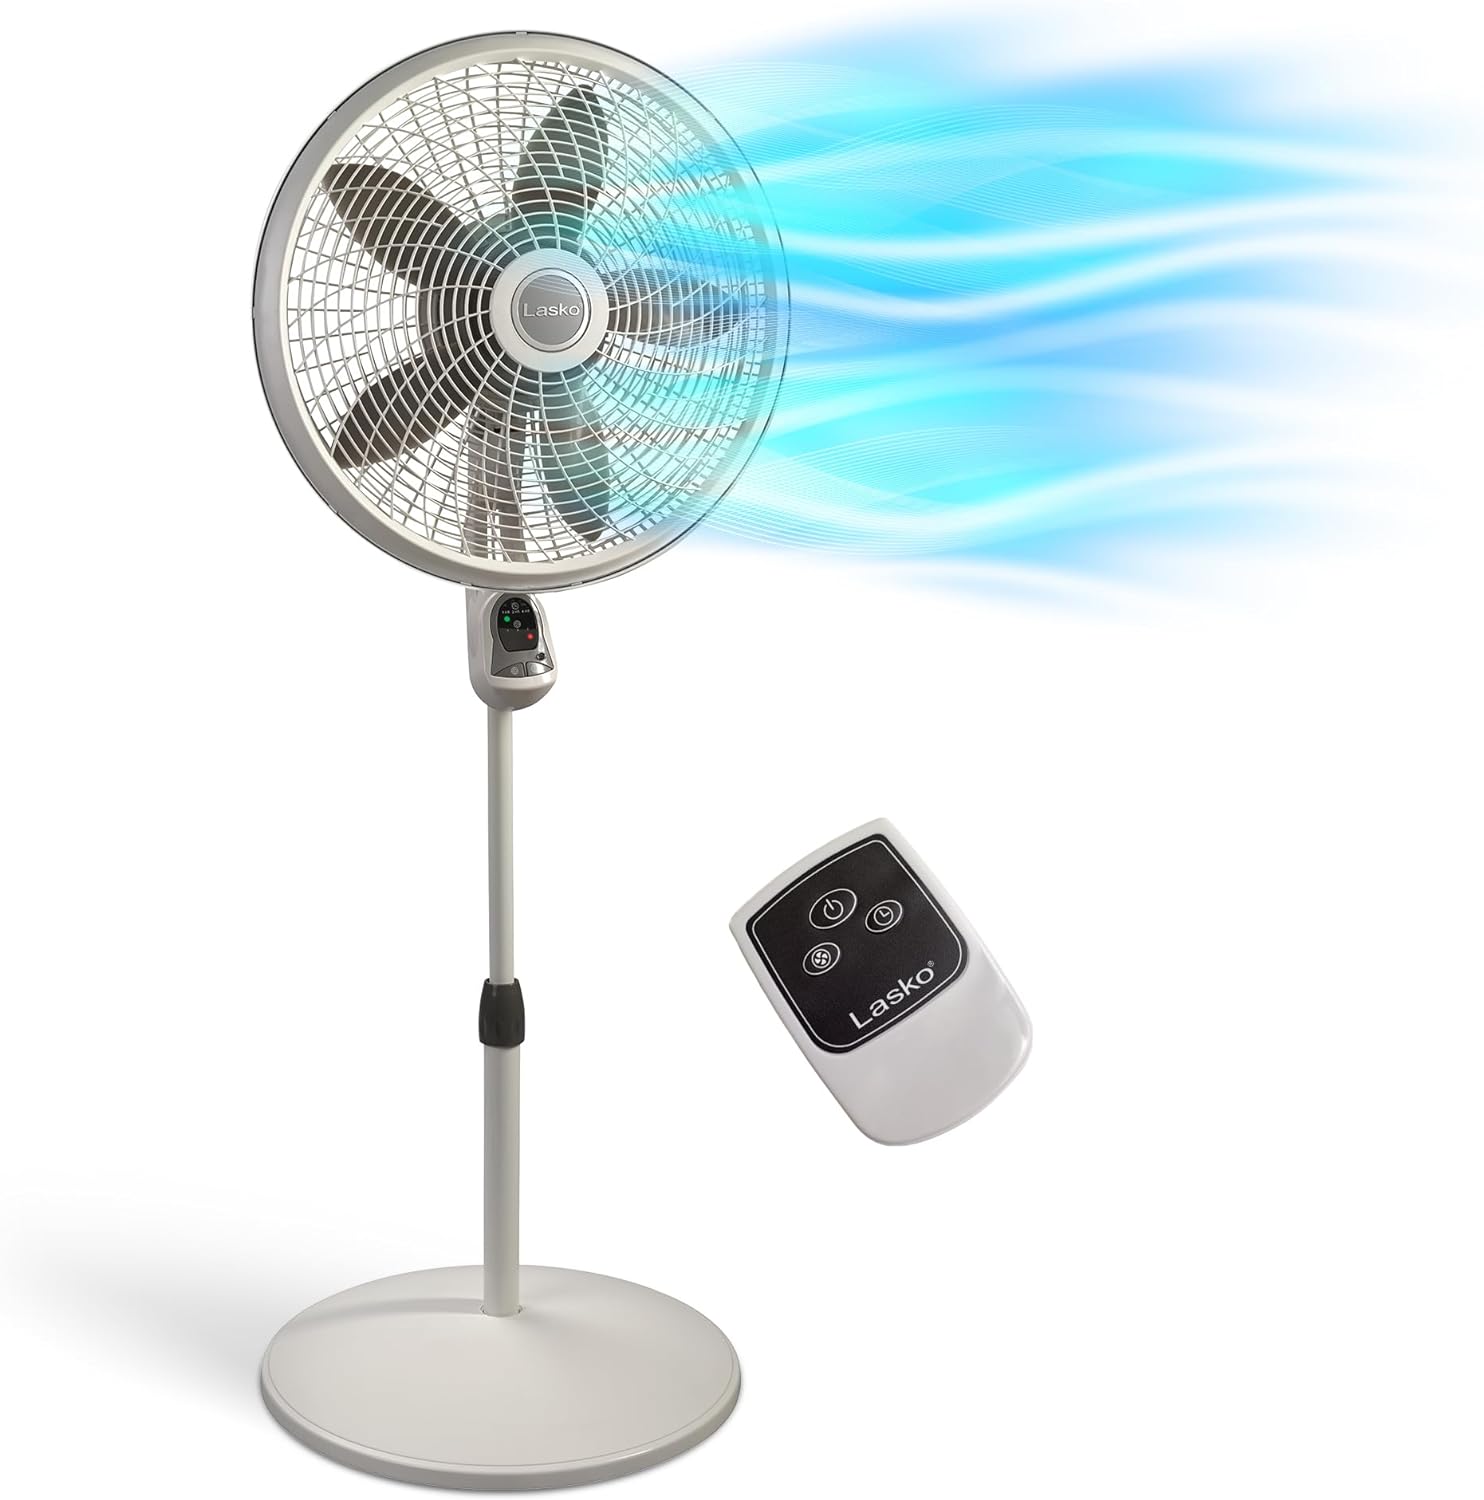 Lasko Cyclone Pedestal Fan, Adjustable Height, Remote Control, Timer, 3 Speeds, for Bedroom, Kitchen, Office and Living Room, 18, White, 1885, Large